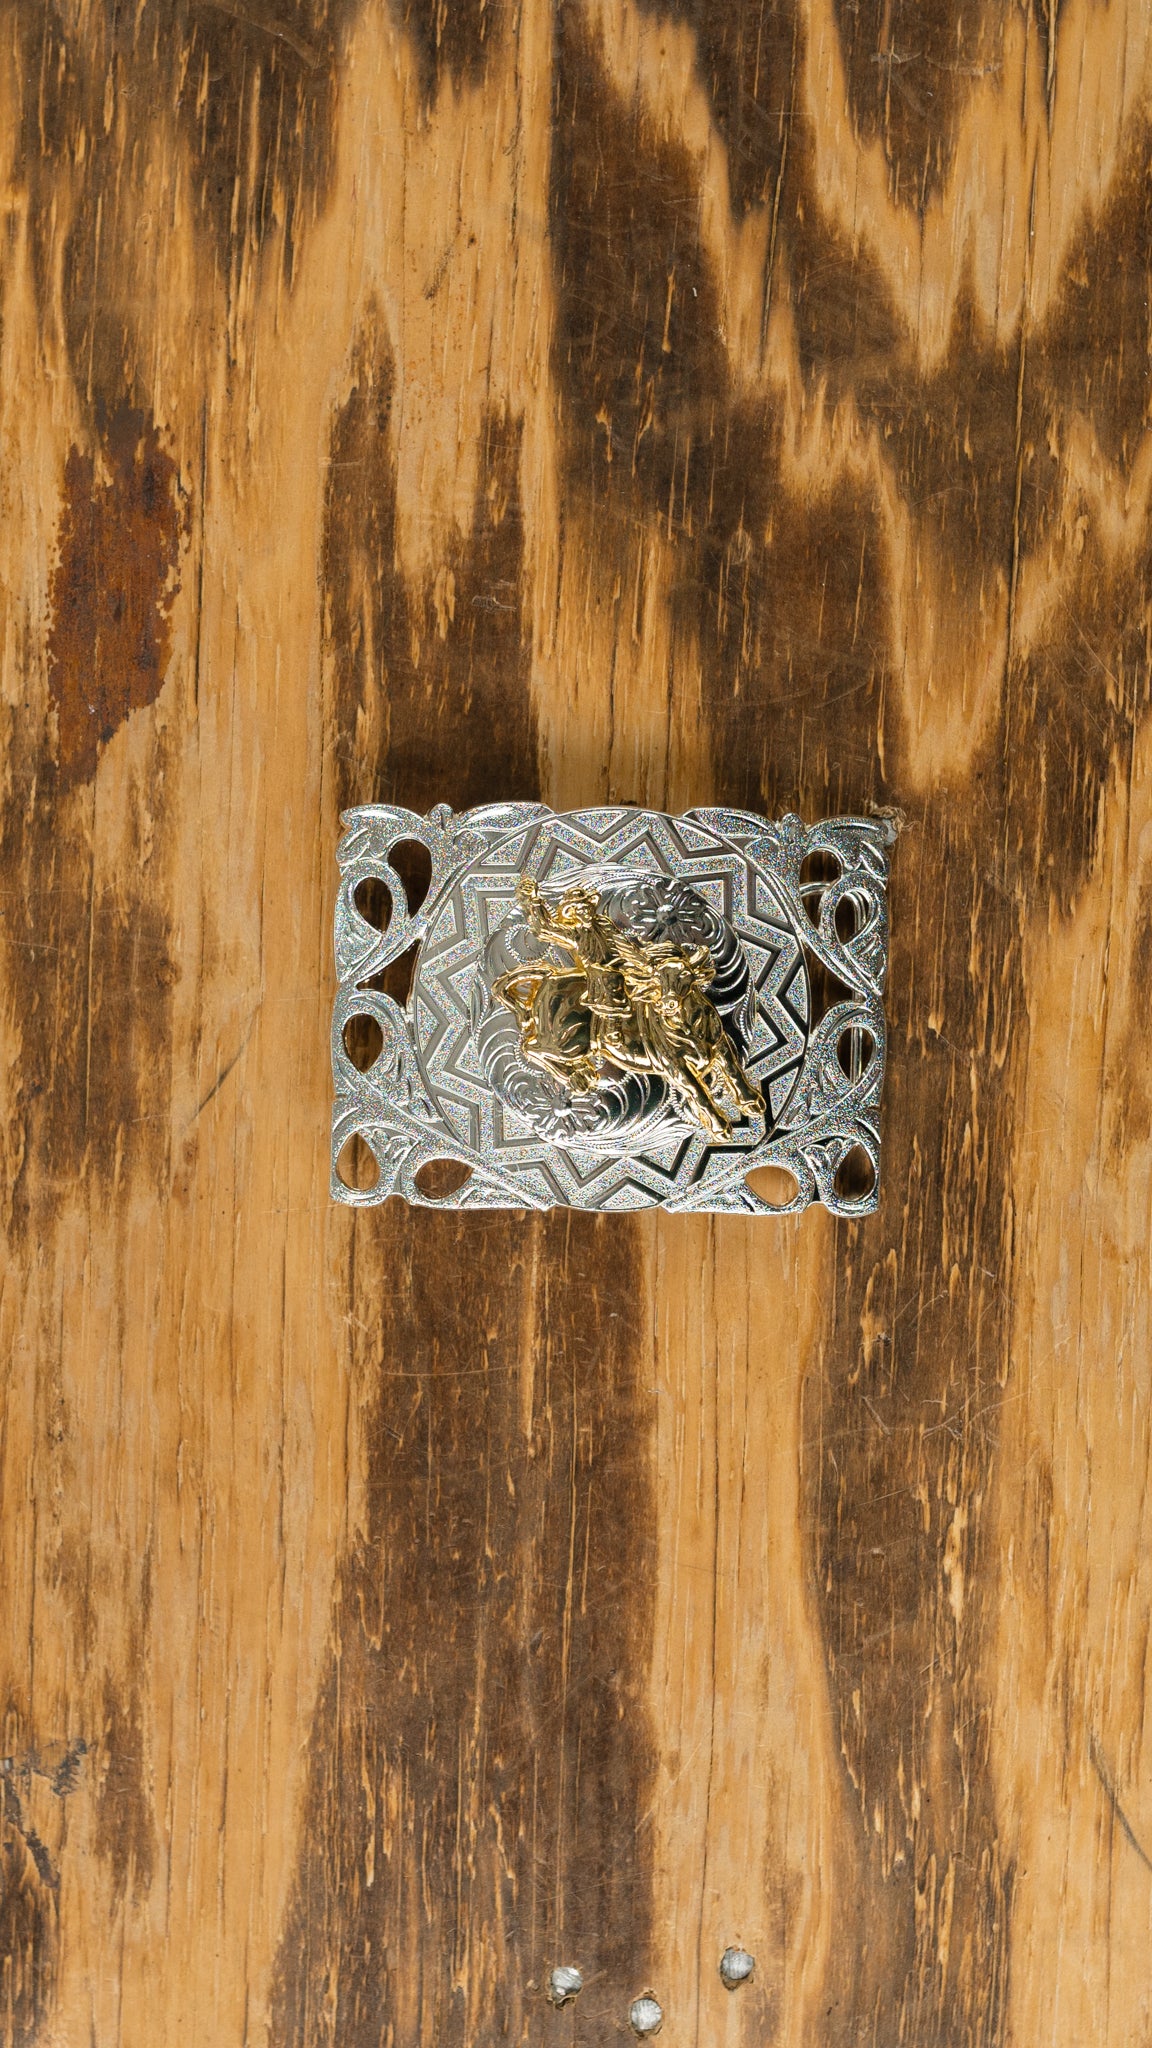 Silver rectangle shape buckle with gold cowboy on horse in the center belt buckle